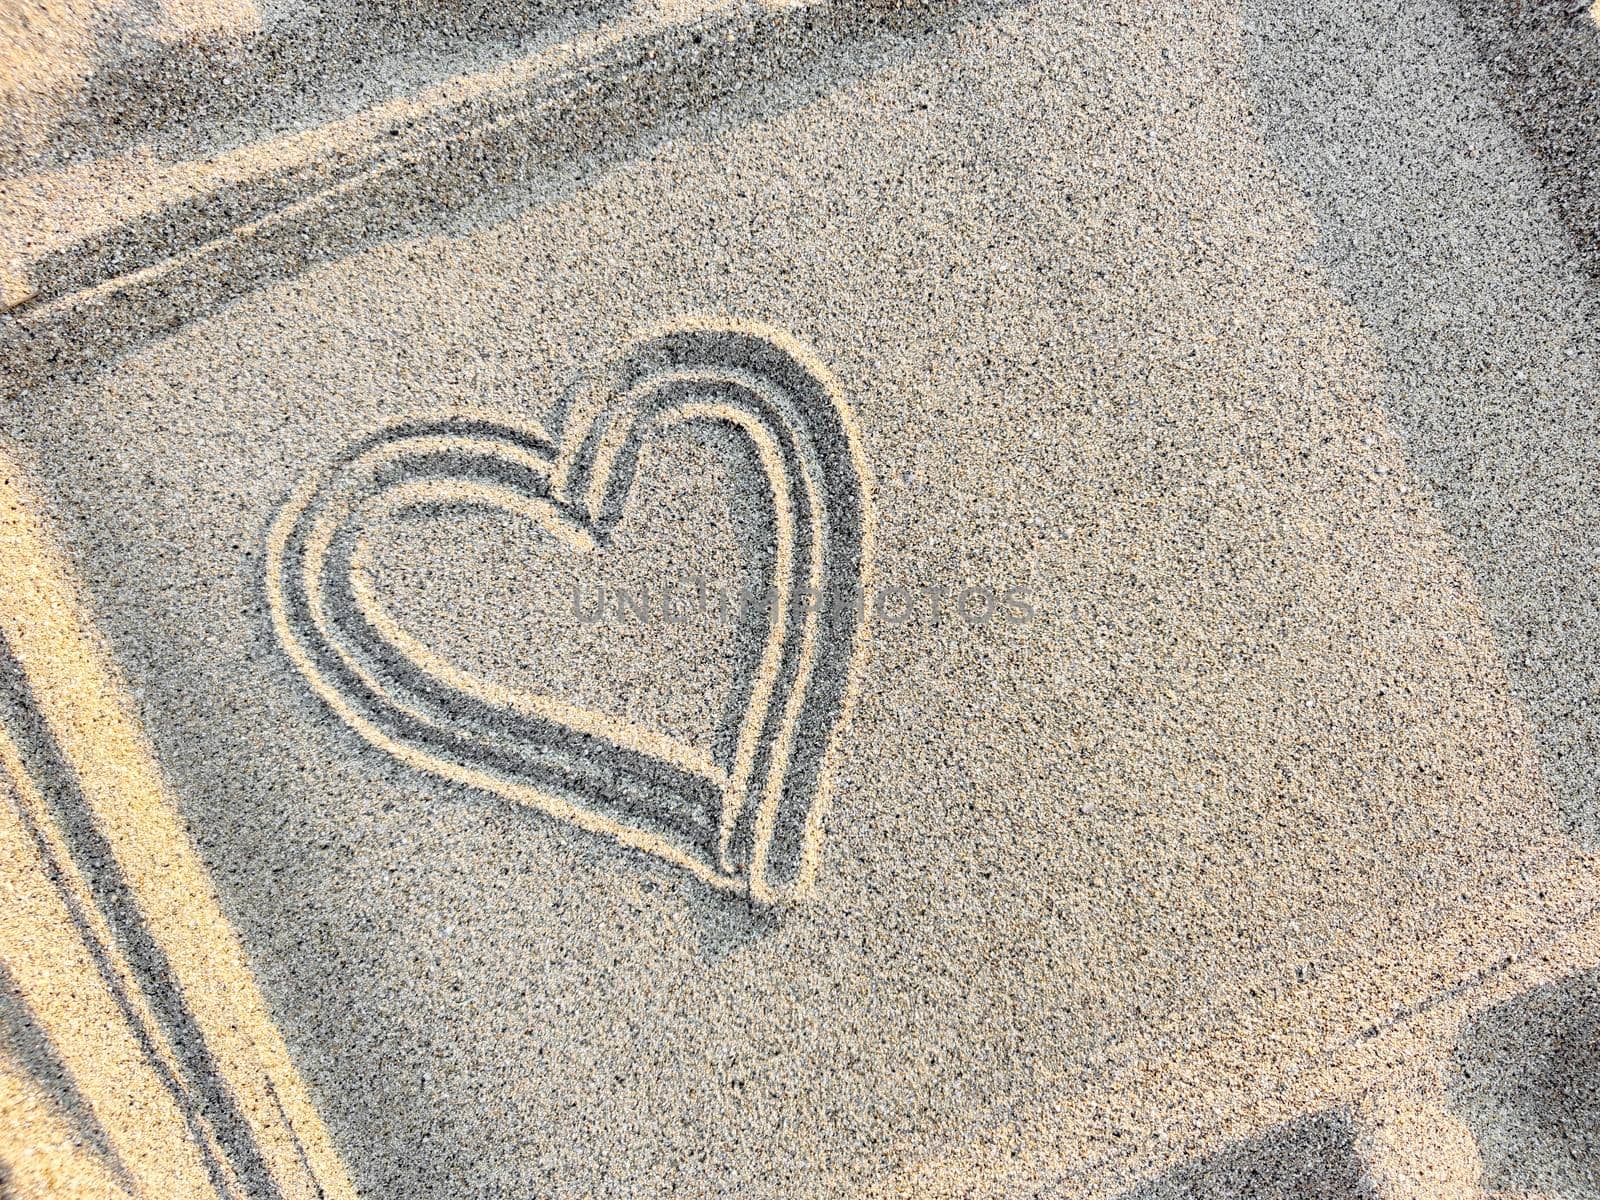 Heart drawn on the sand in a frame, top view, close-up. Copy space.